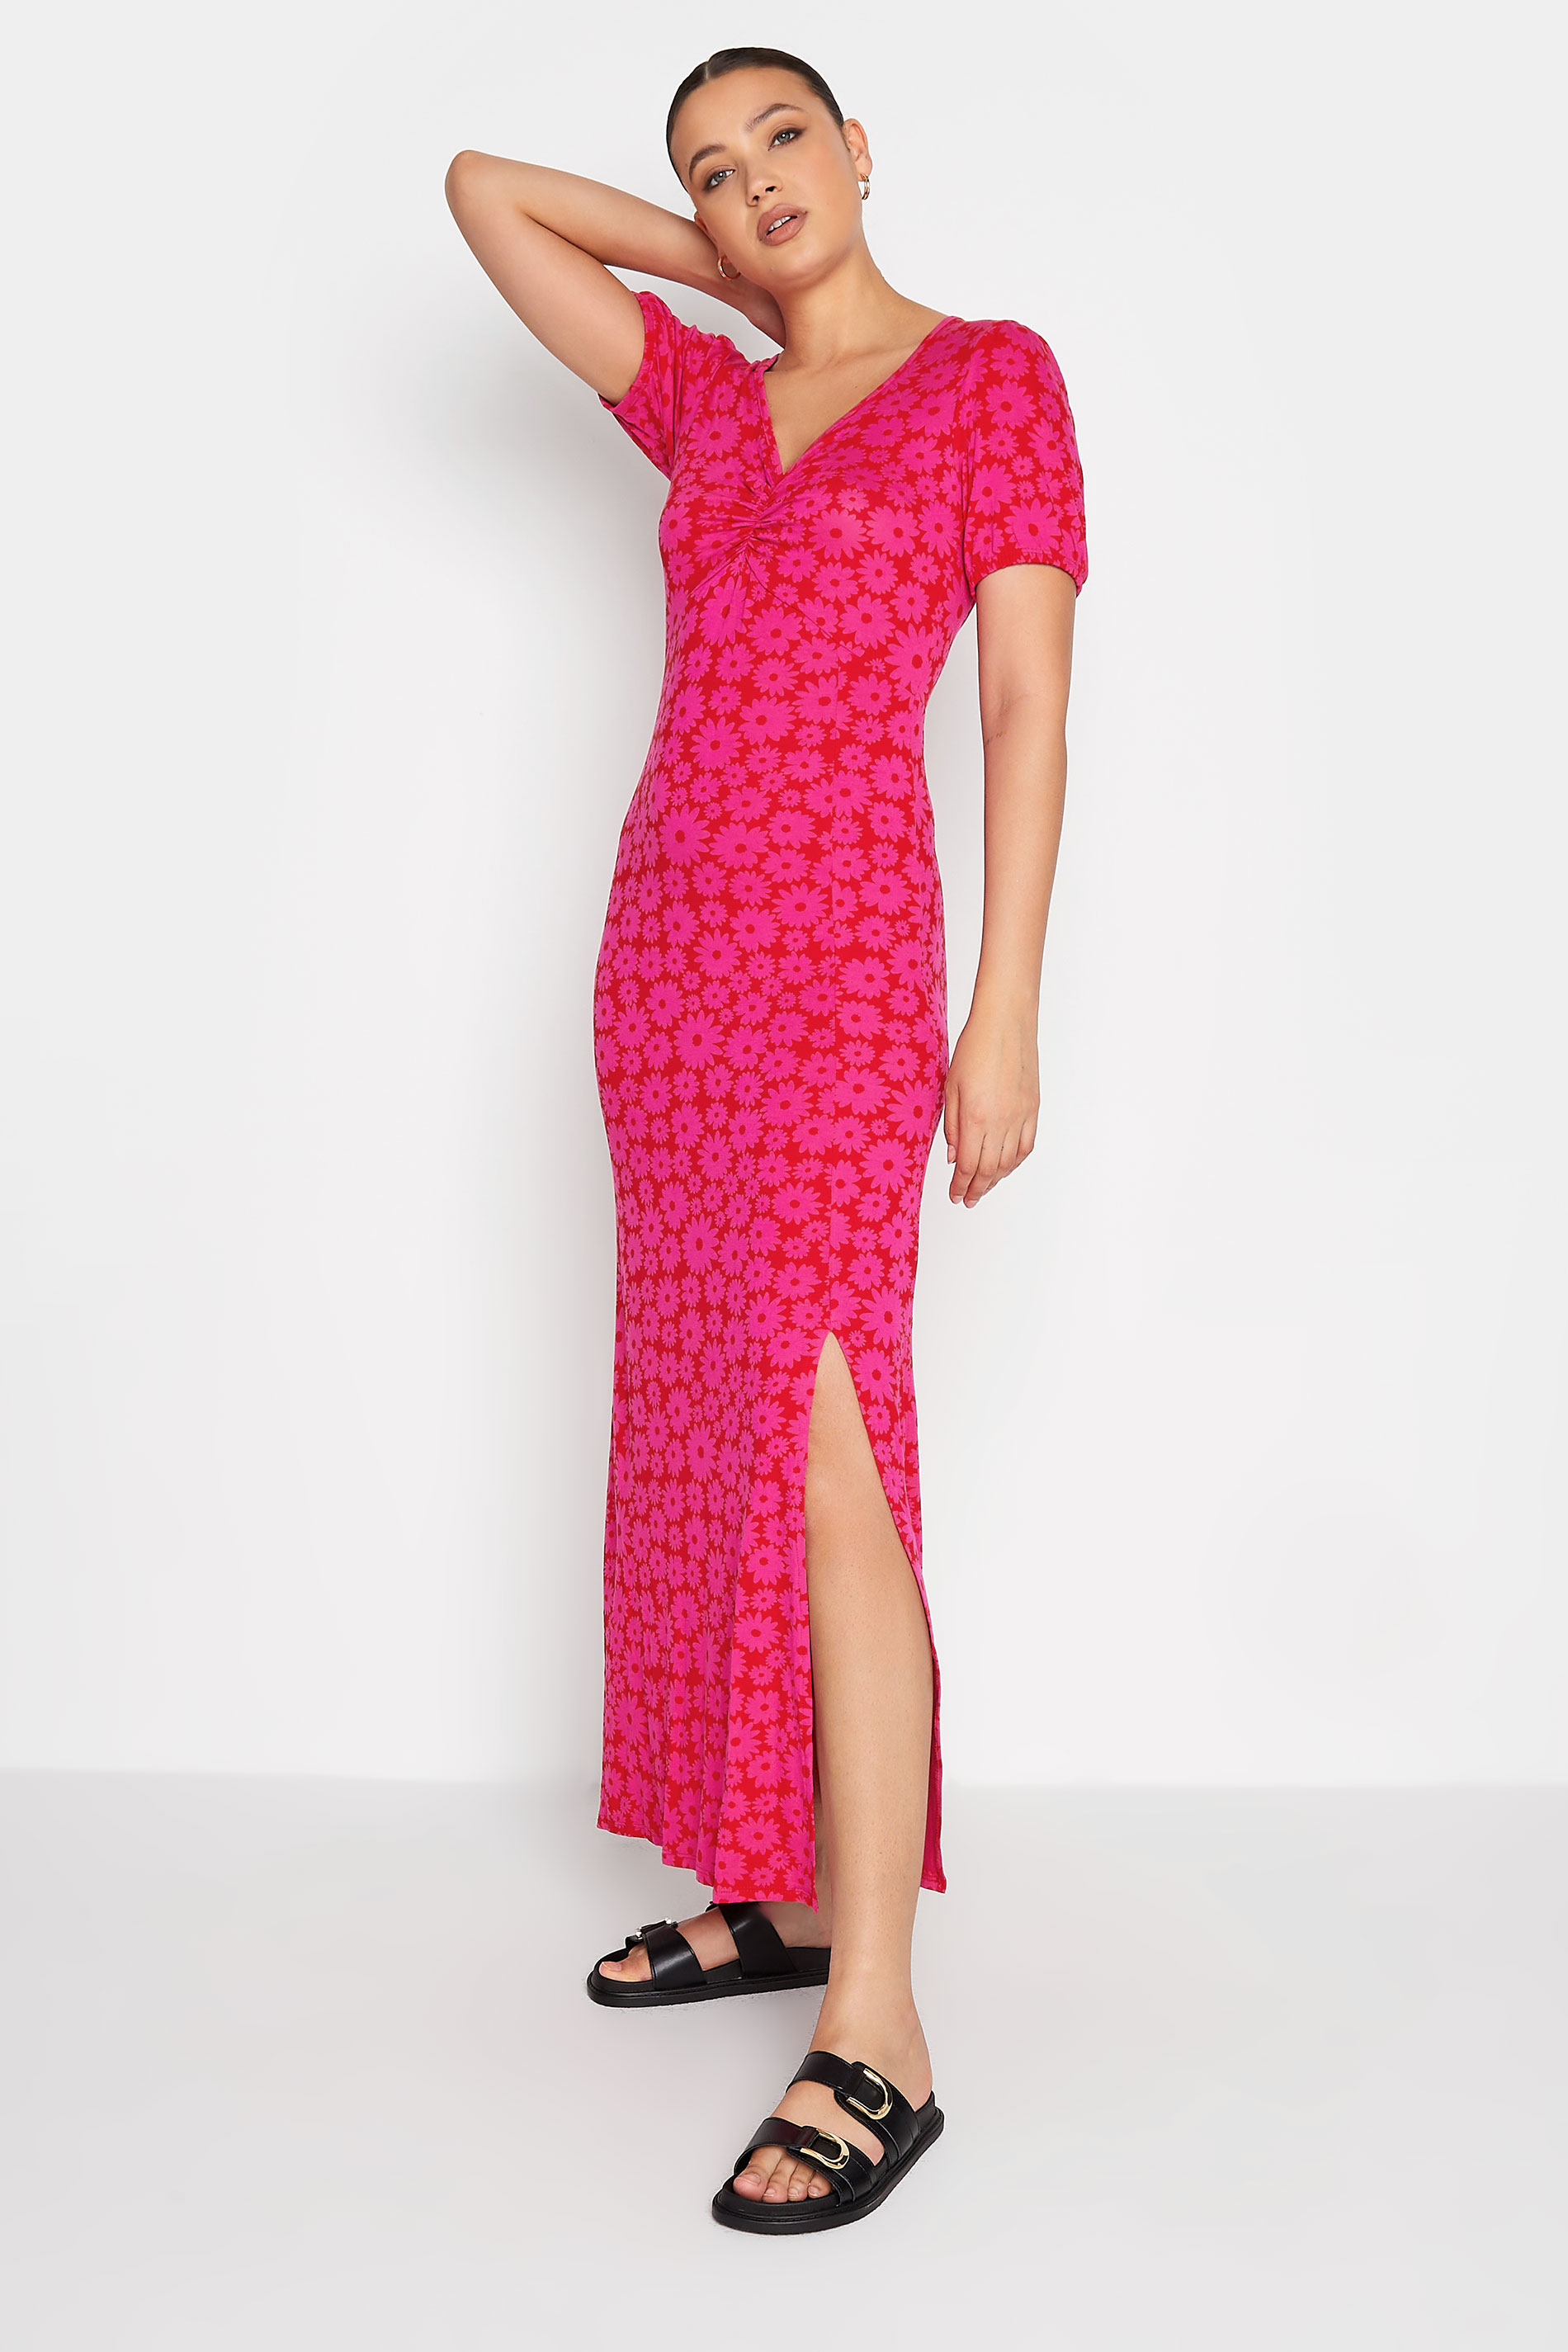 LTS Tall Women's Hot Pink Floral Print Ruched Maxi Dress | Long Tall Sally 1